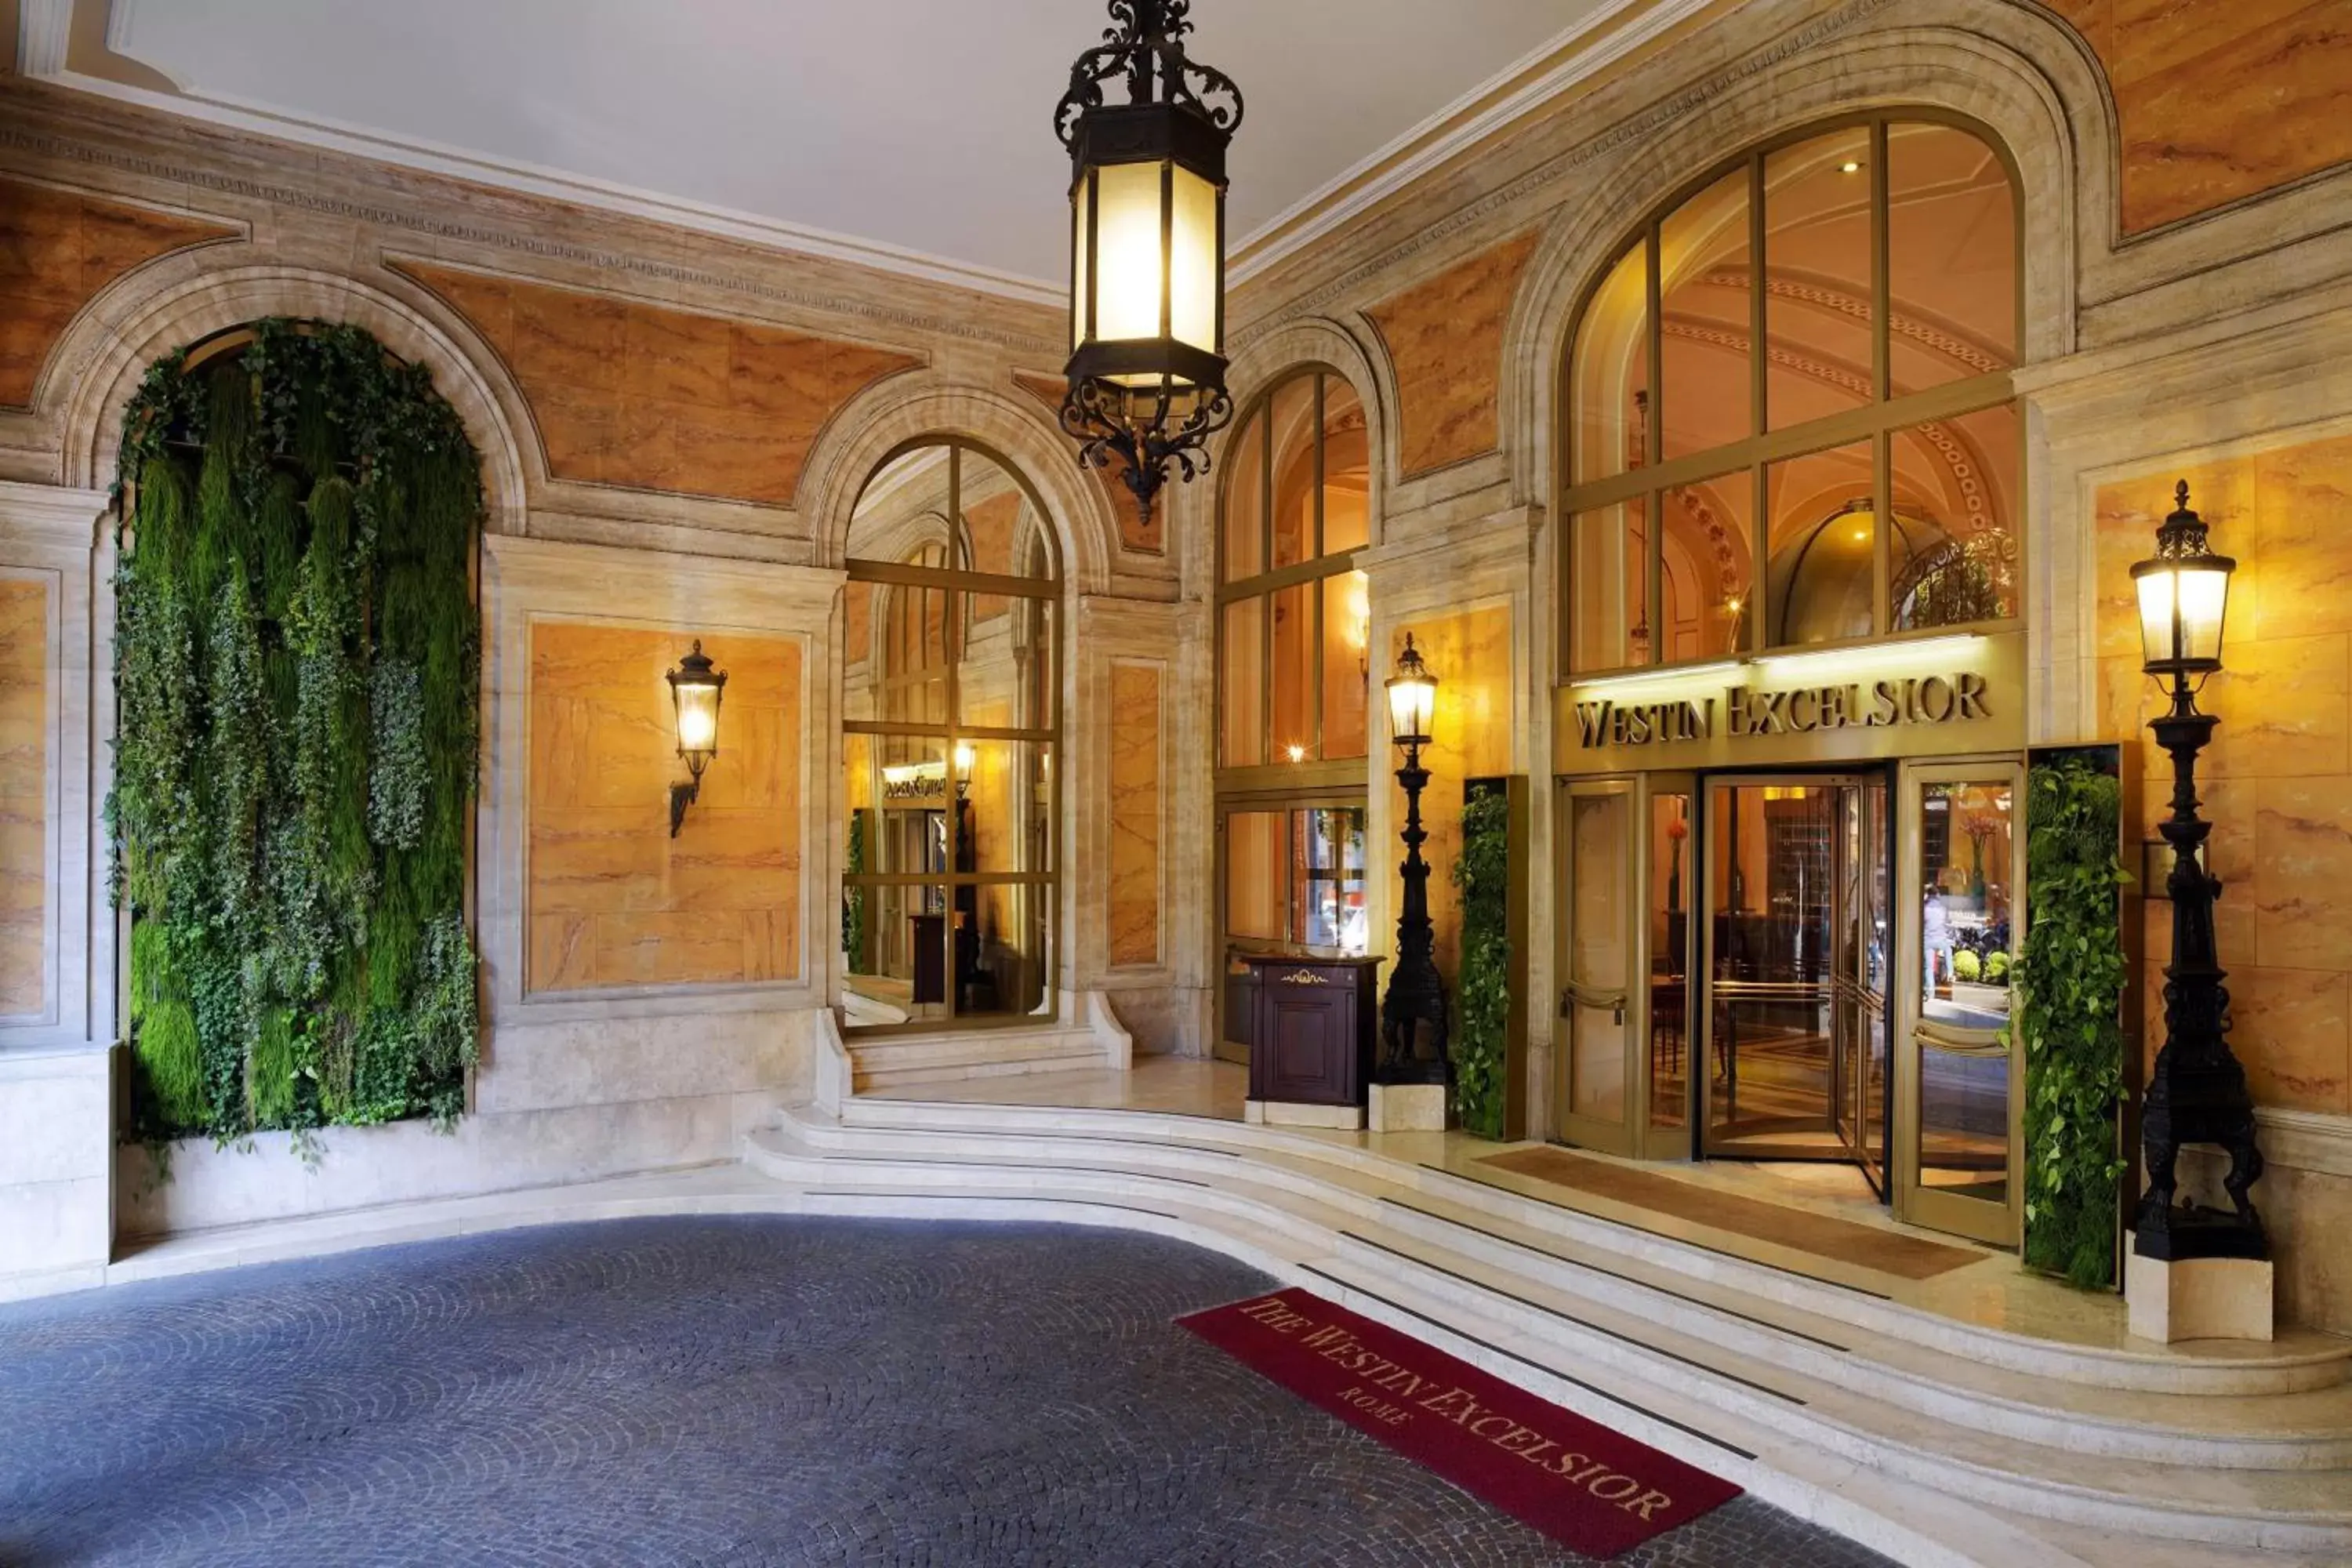 Property building in The Westin Excelsior, Rome